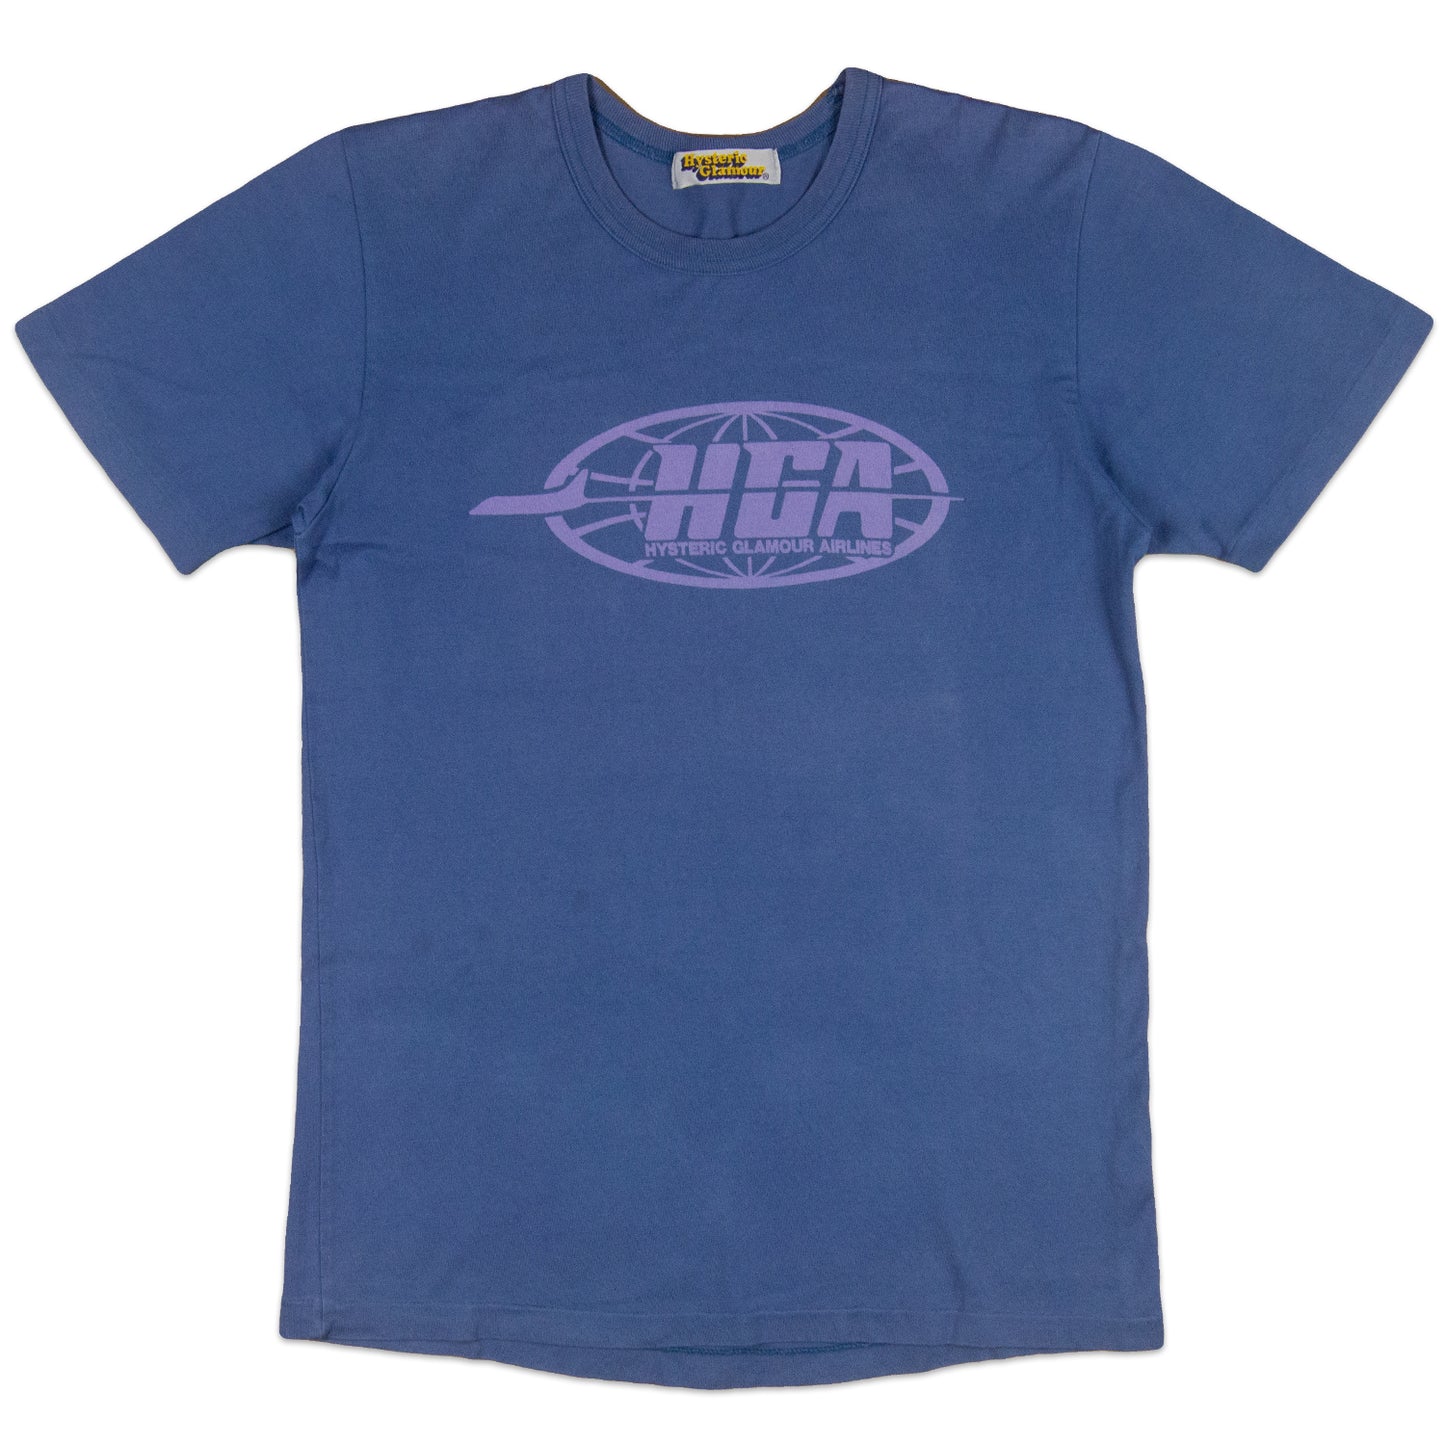 Hysteric Glamour Airlines Tee